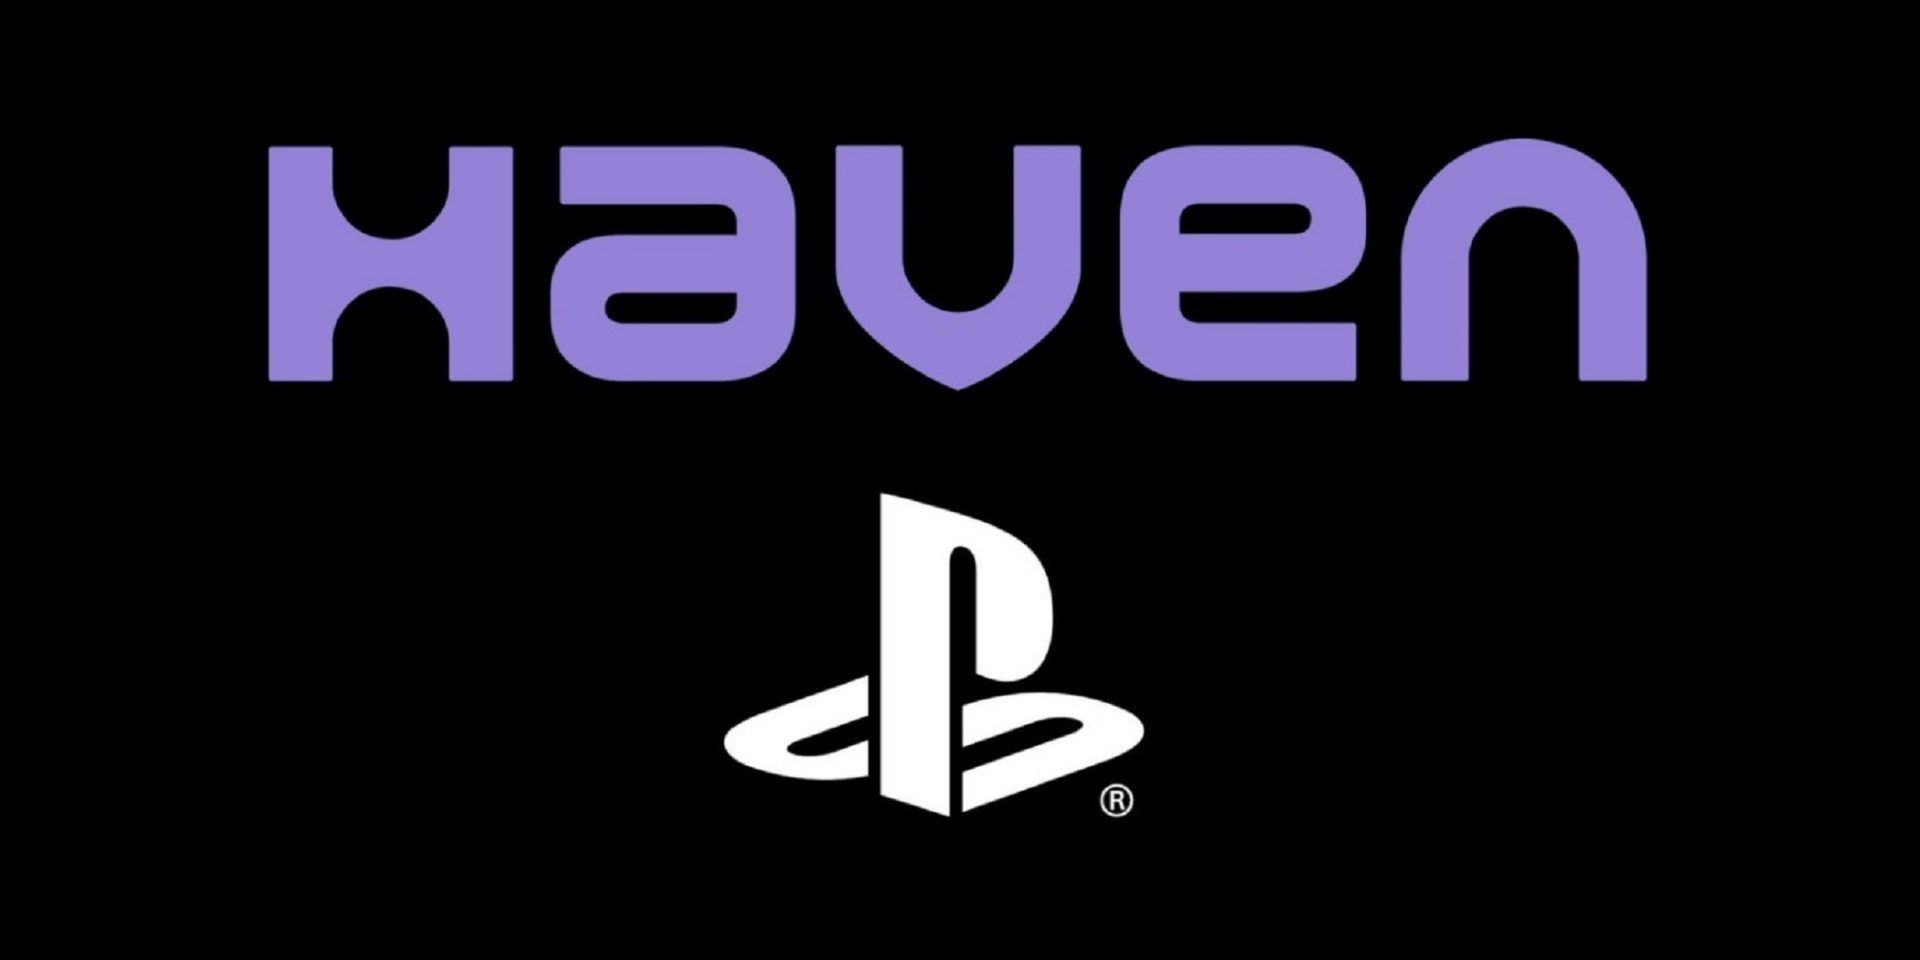 Haven Logo With PlayStation Logo Under It On Black Background 3rd Attempt